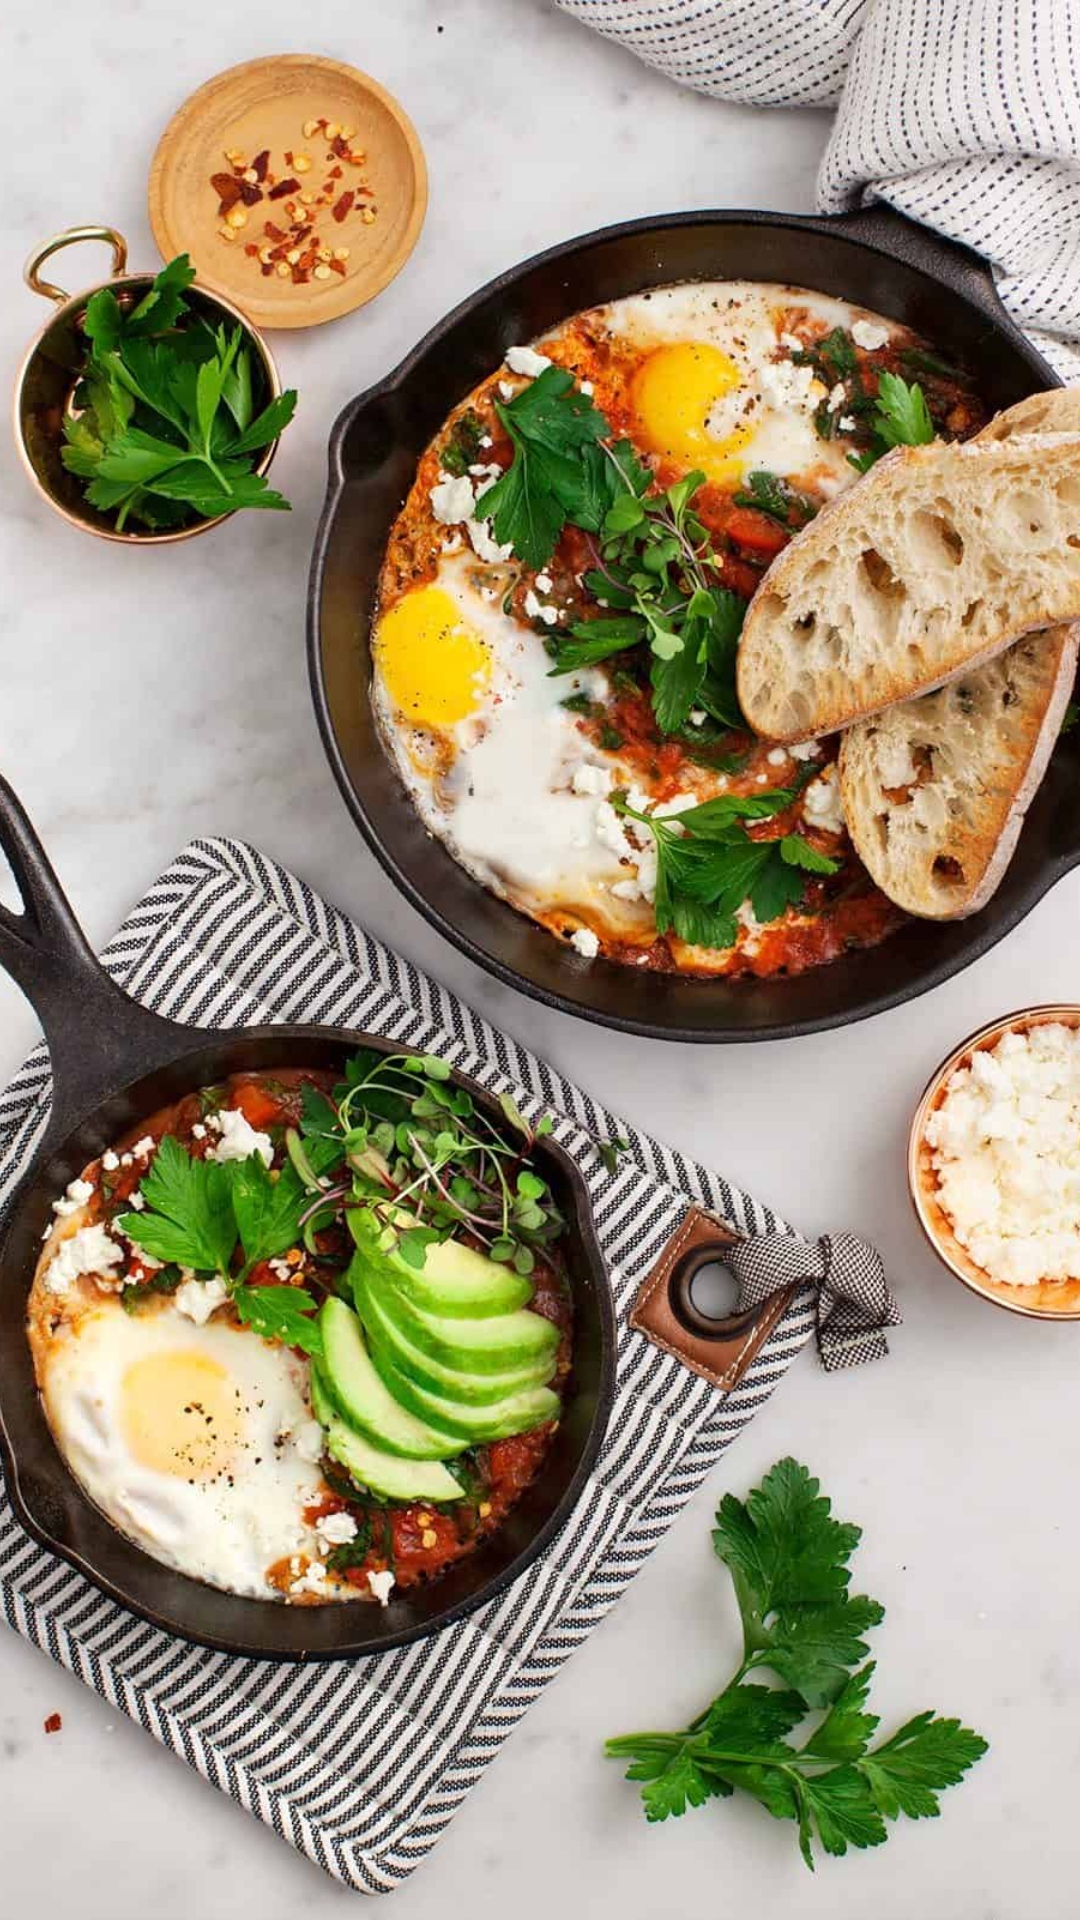 5 healthy brunch ideas you must try